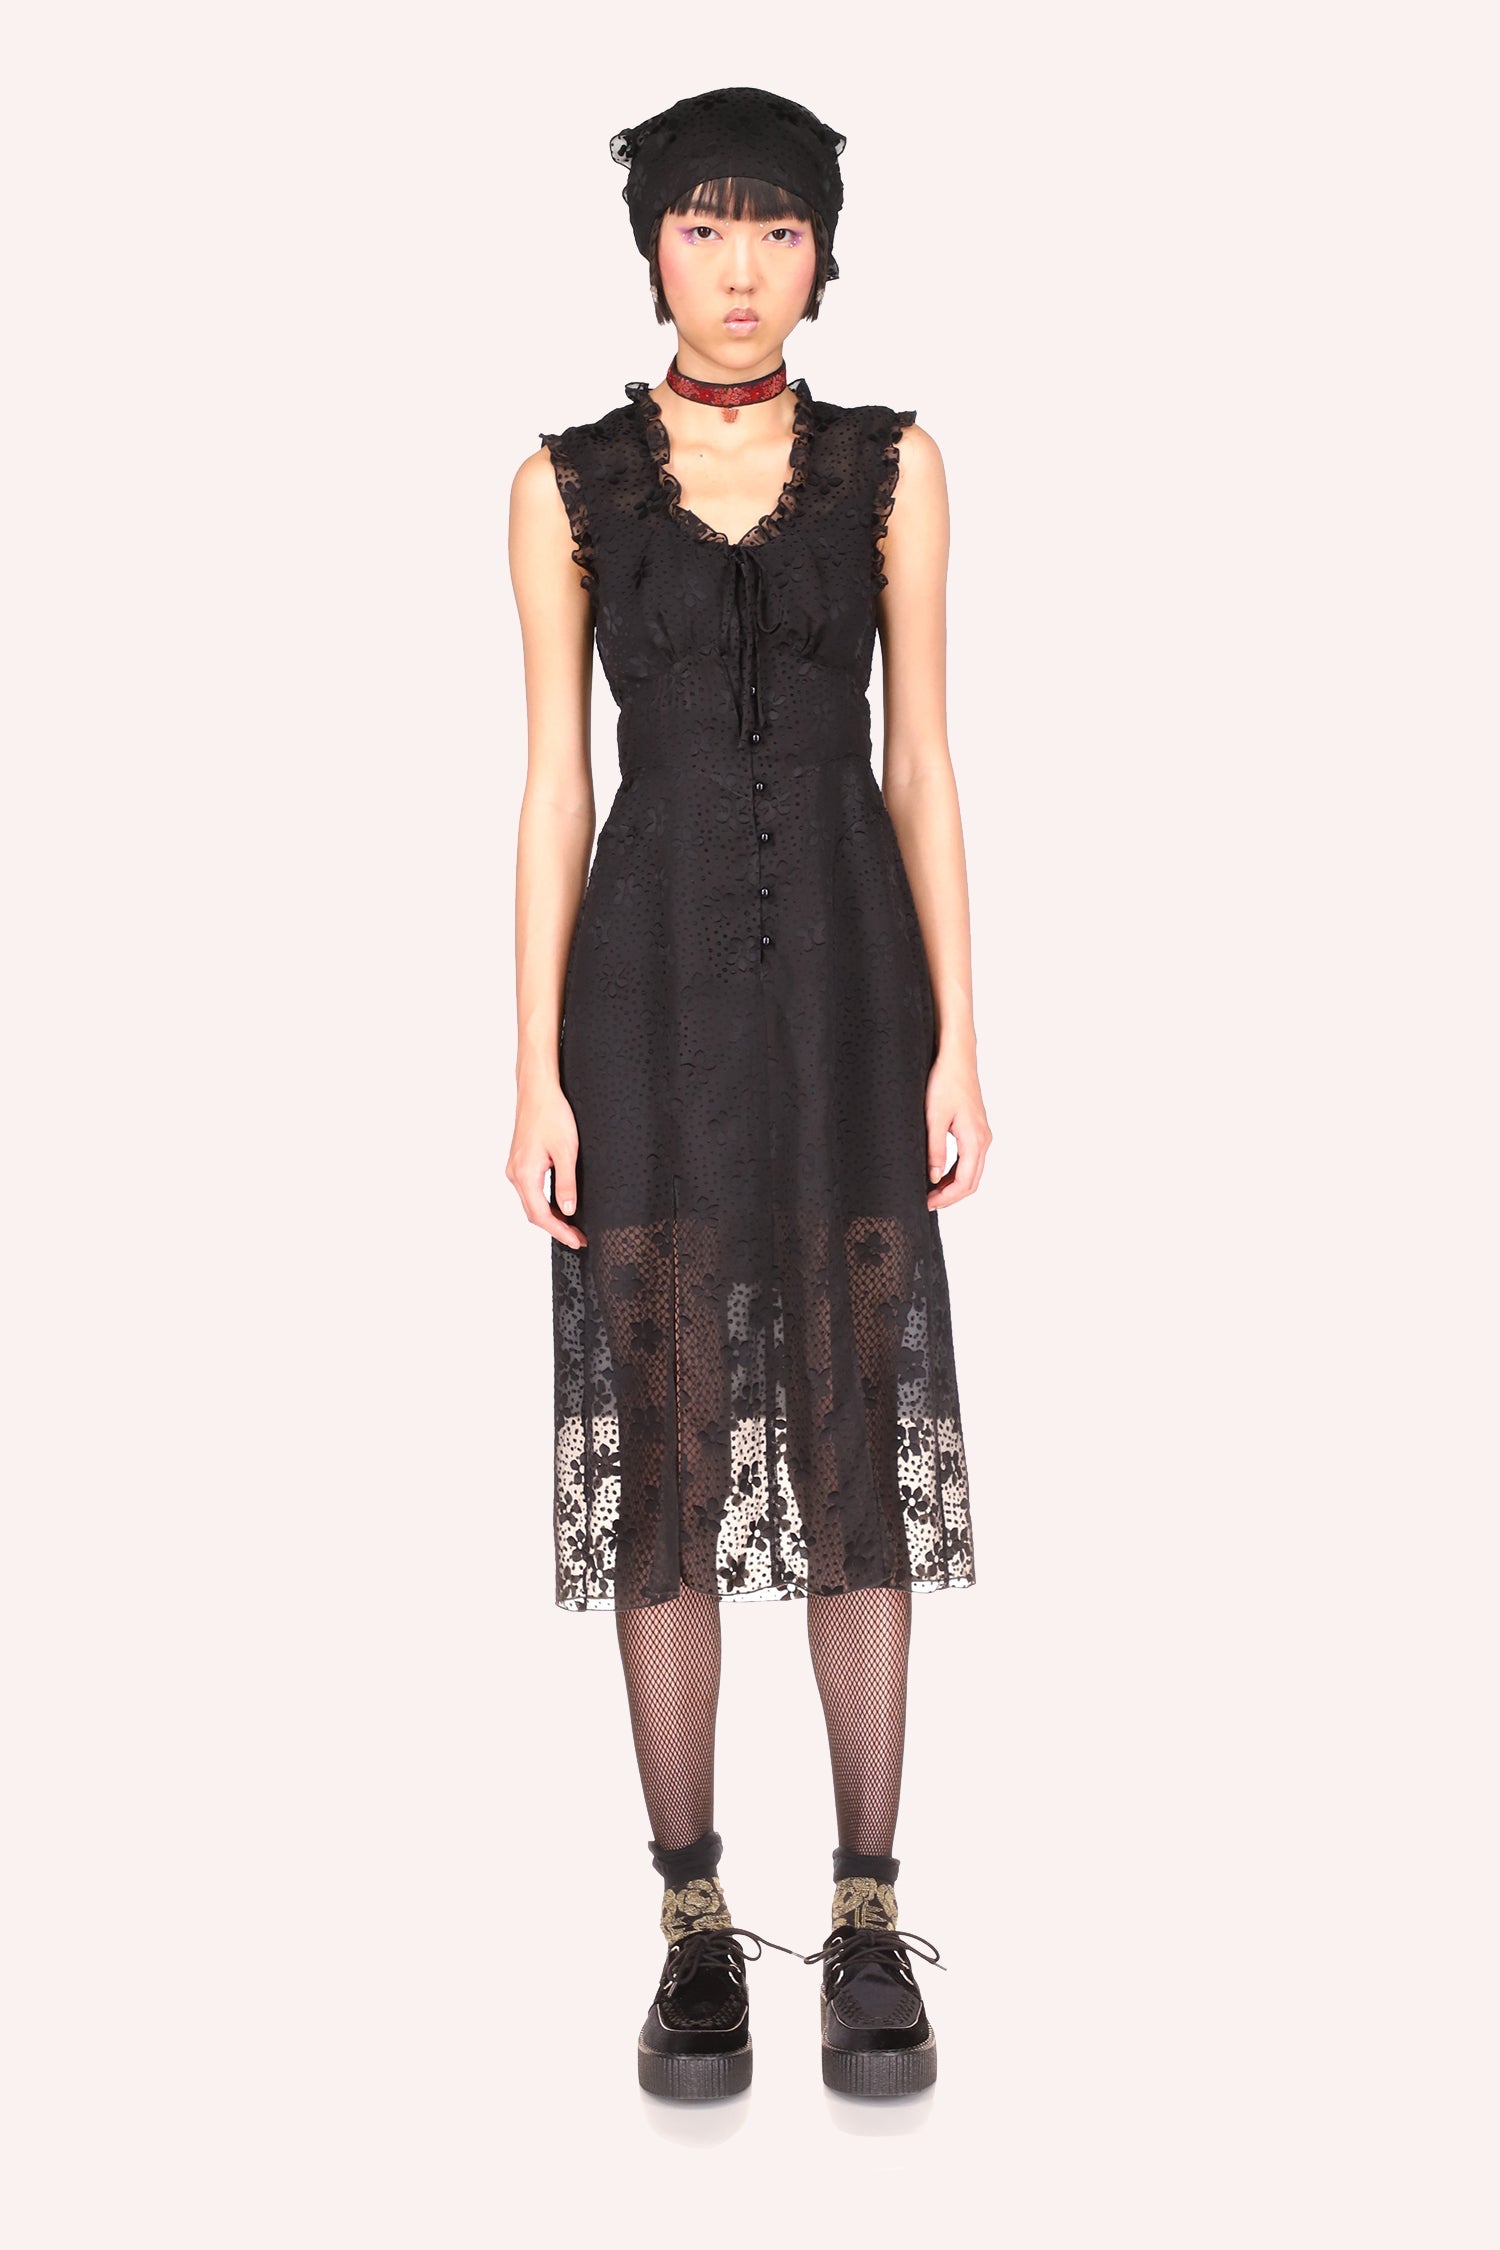 Daisy Dot Burnout Dress Black, sleeveless, large straps over shoulders, mid-tight long black, then lace to under-knees 